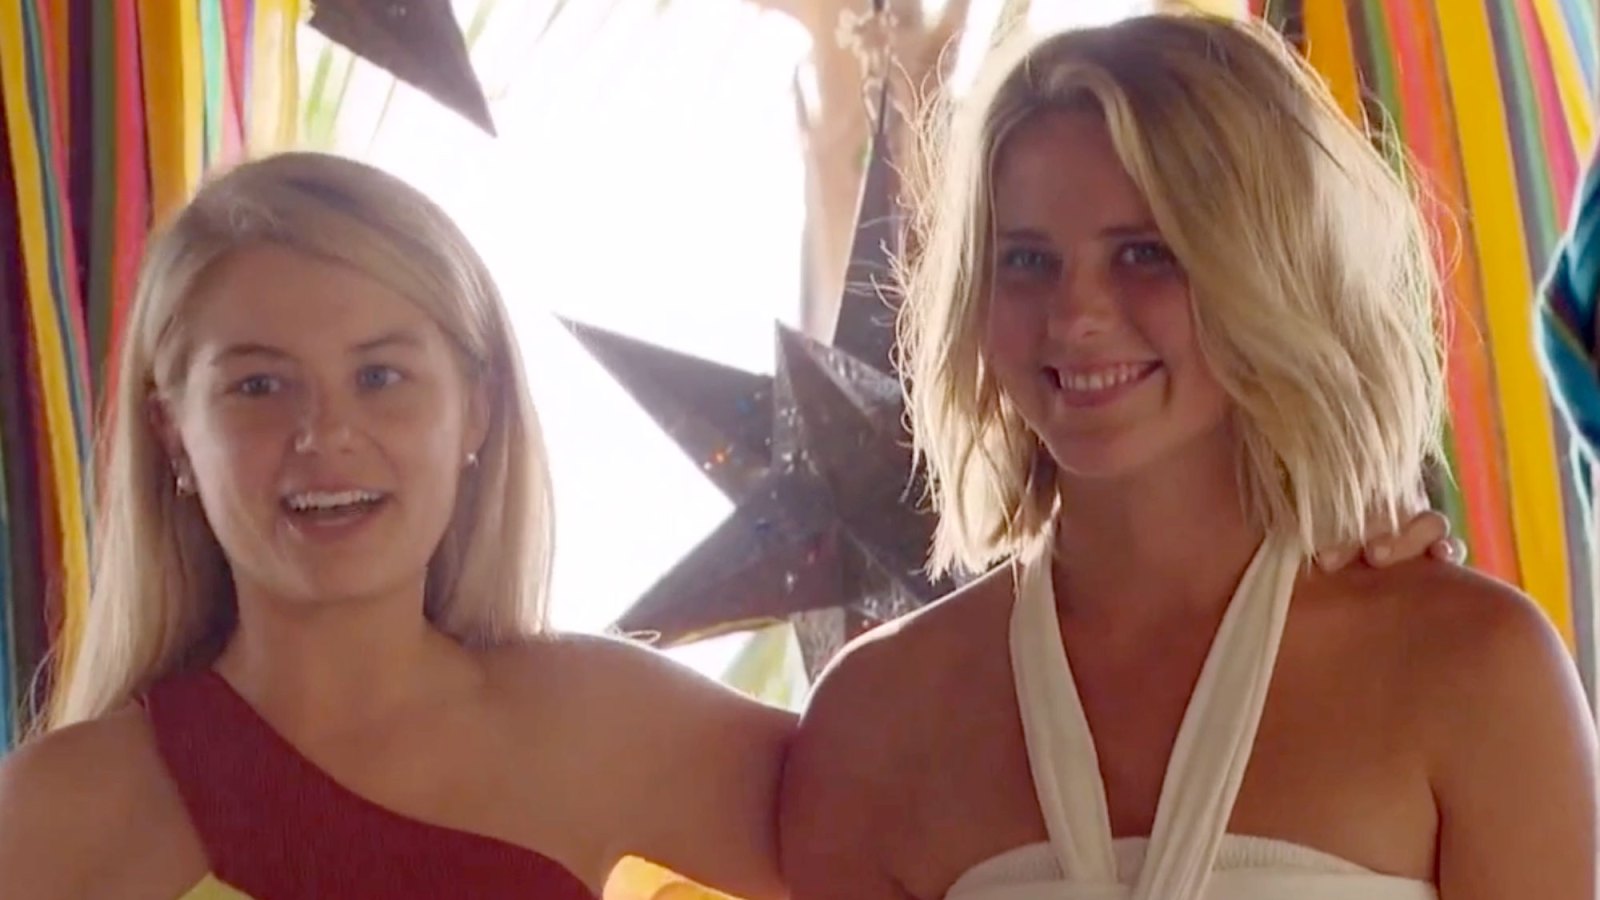 5 Things to Know About ‘Bachelor in Paradise’ Star Demi Burnett’s GF Kristian Haggerty